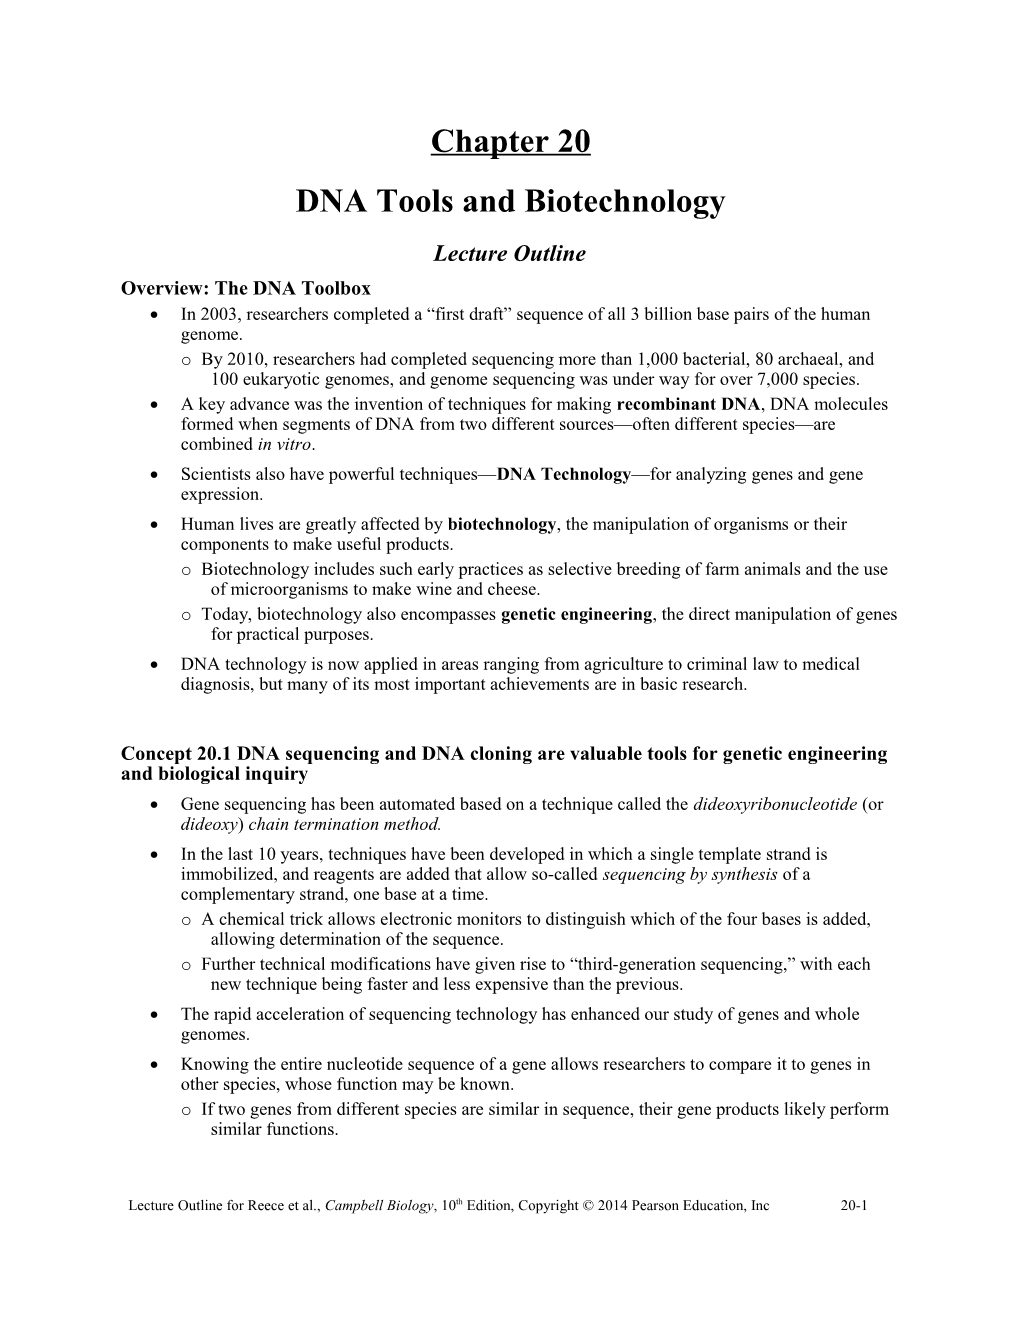 DNA Tools and Biotechnology